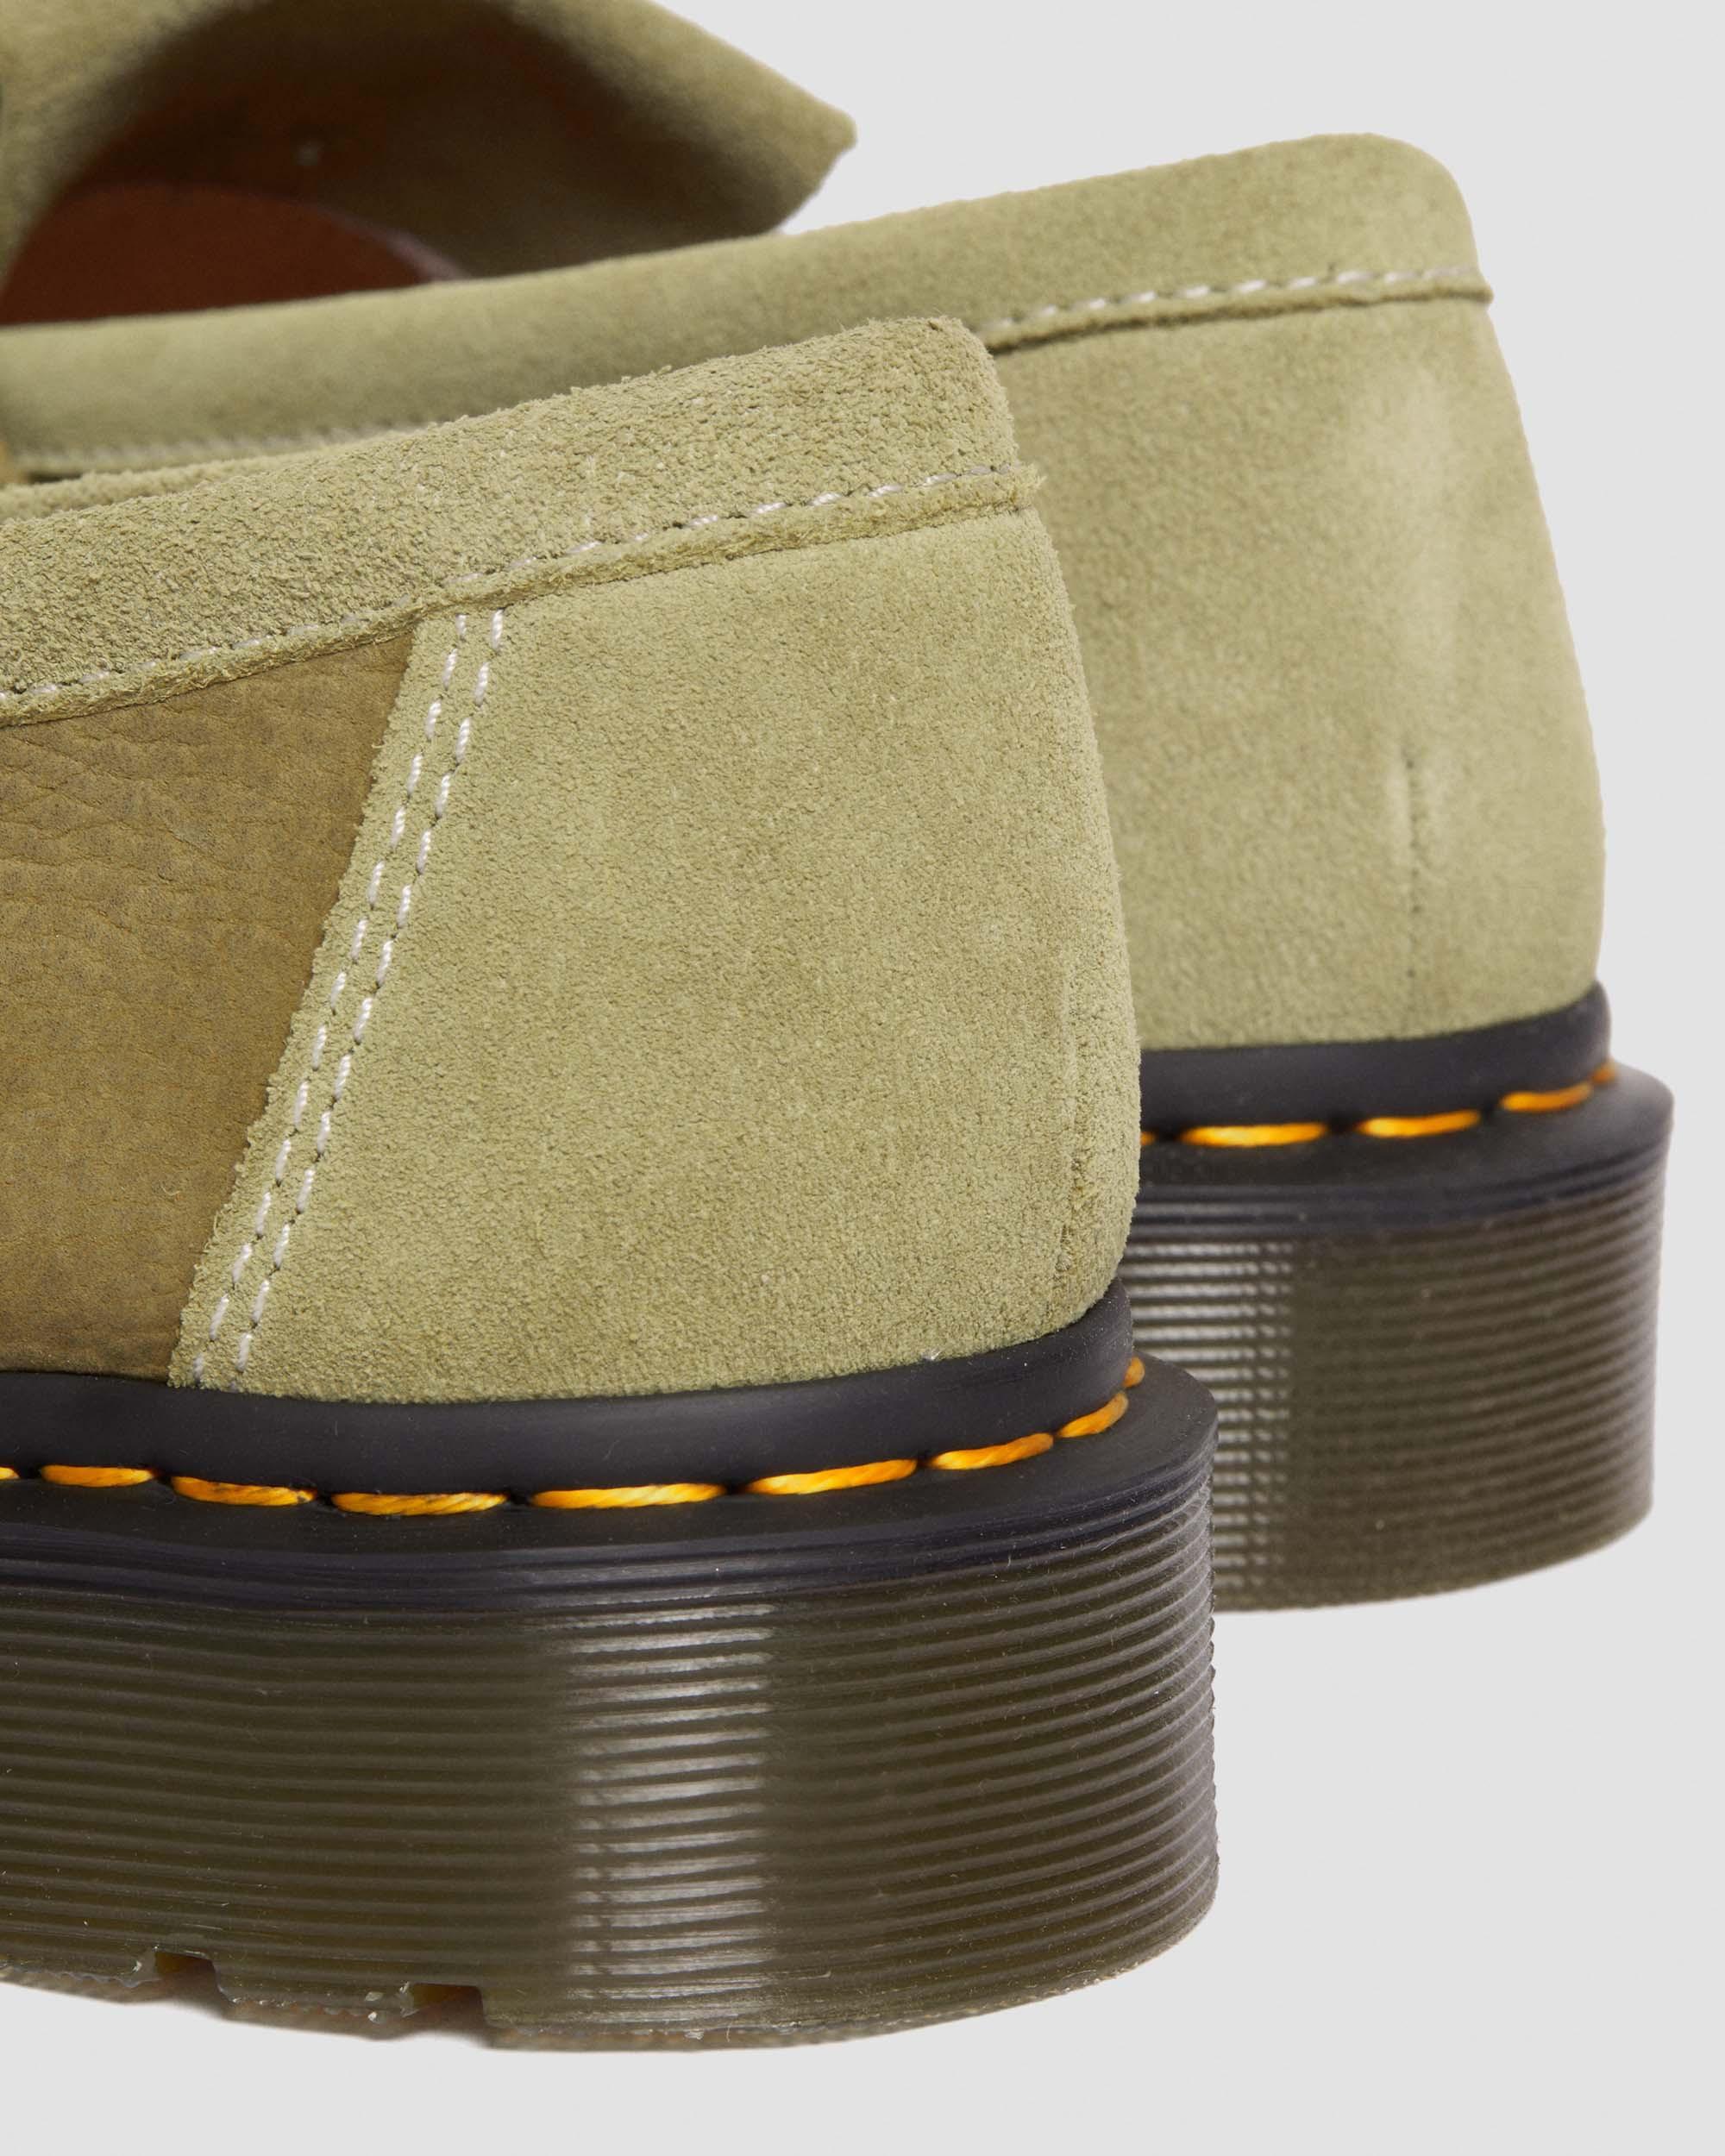 Adrian Tumbled Nubuck Leather Tassel Loafers in Muted Olive